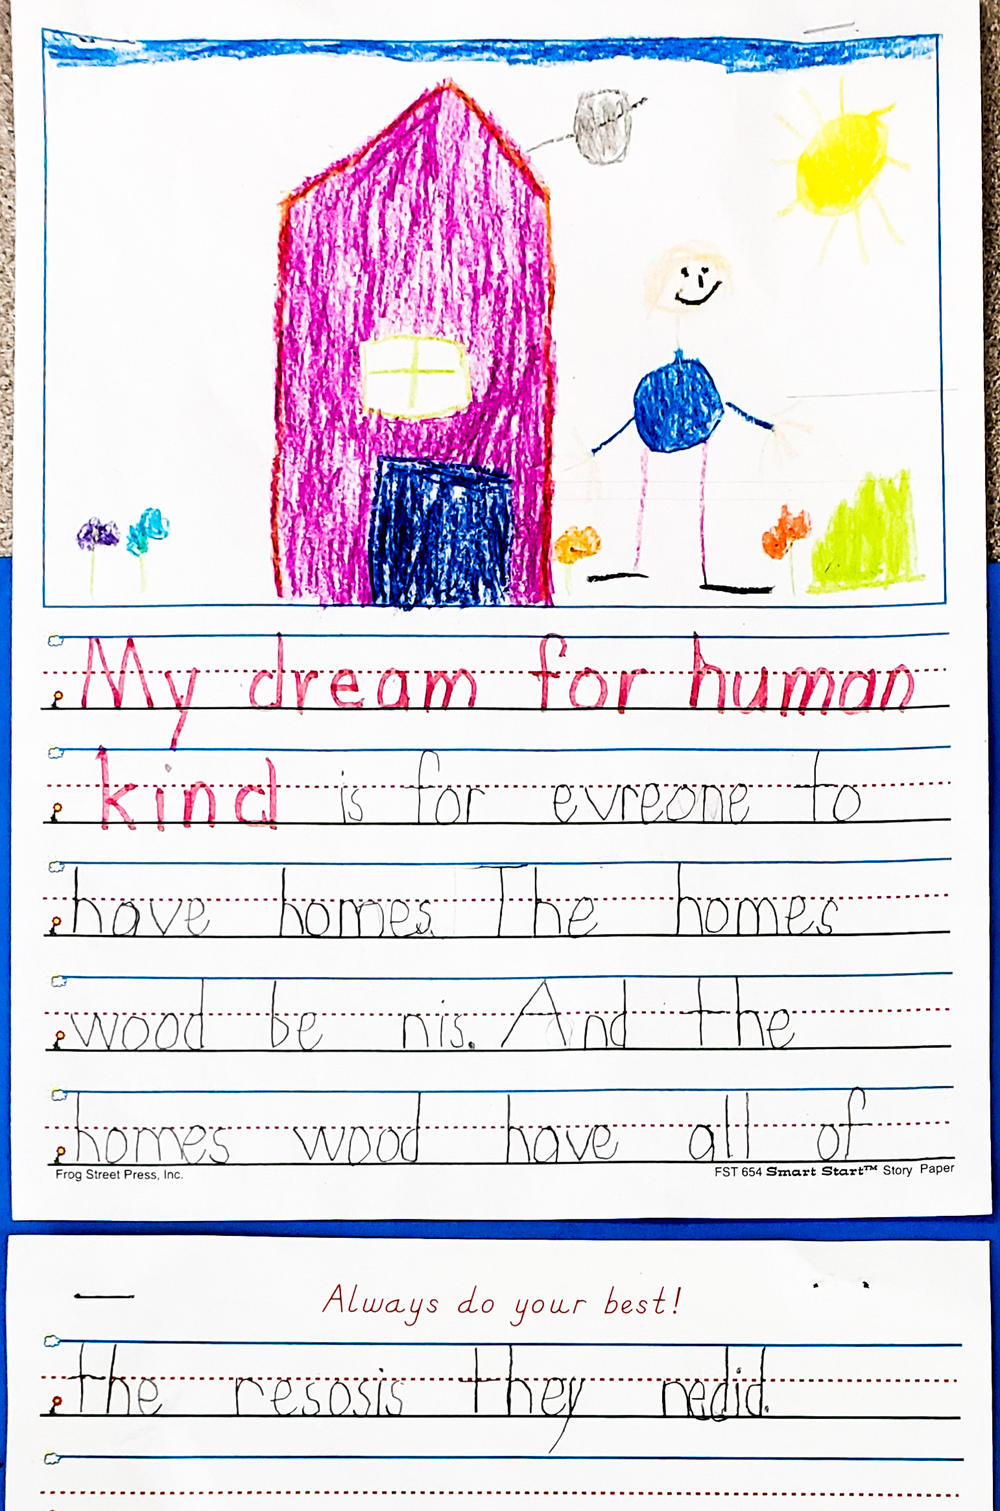 Housing is on the mind of one first grader at The Friends School of Atlanta.